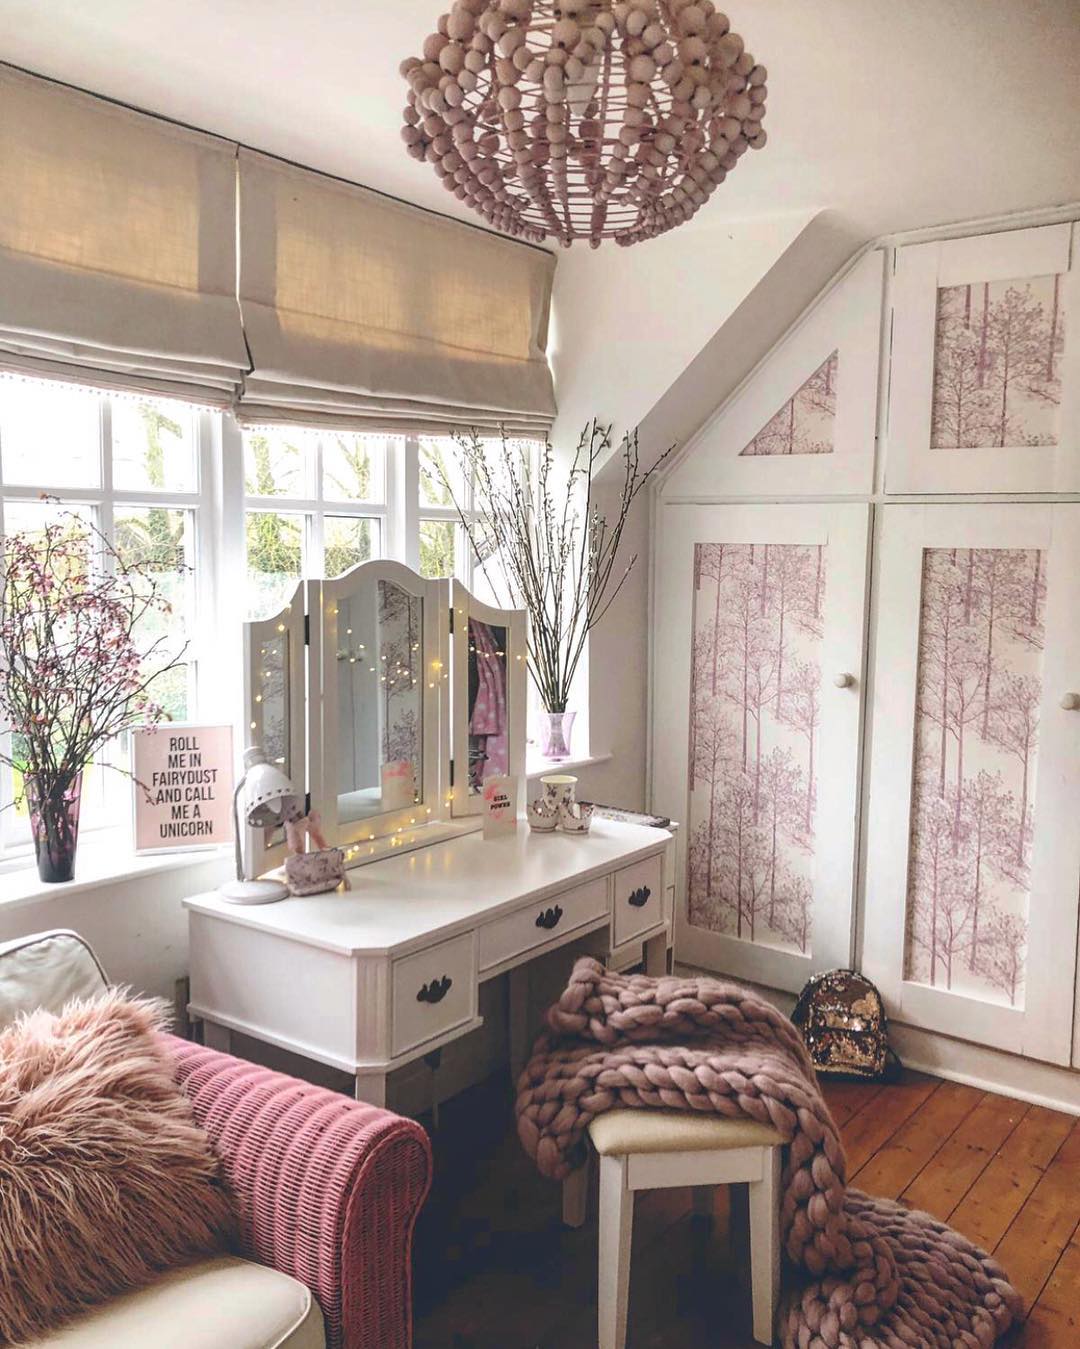 Wardrobe Built into Existing Wall Next to Small Vanity. Photo by Instagram user @pandora.maxton